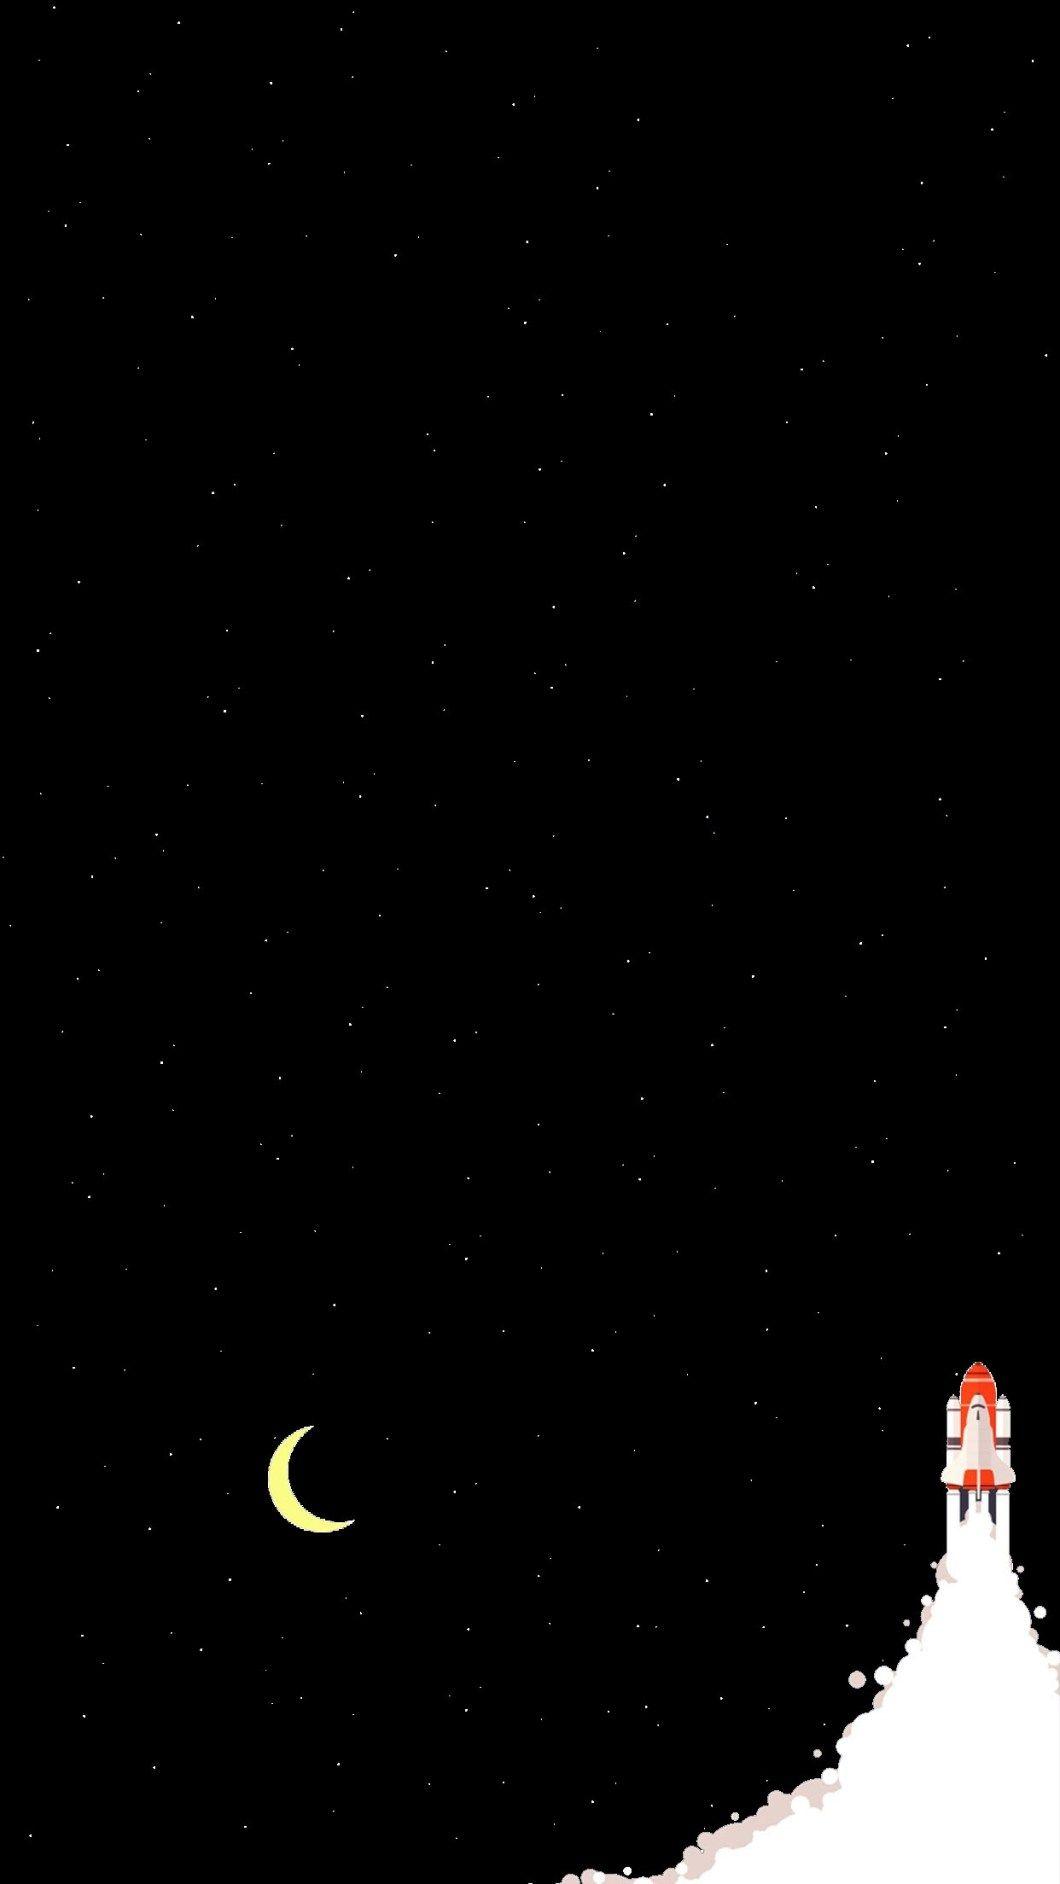 Cool Starry Night Space Rocket iPhone 6 Wallpaper. Space iphone